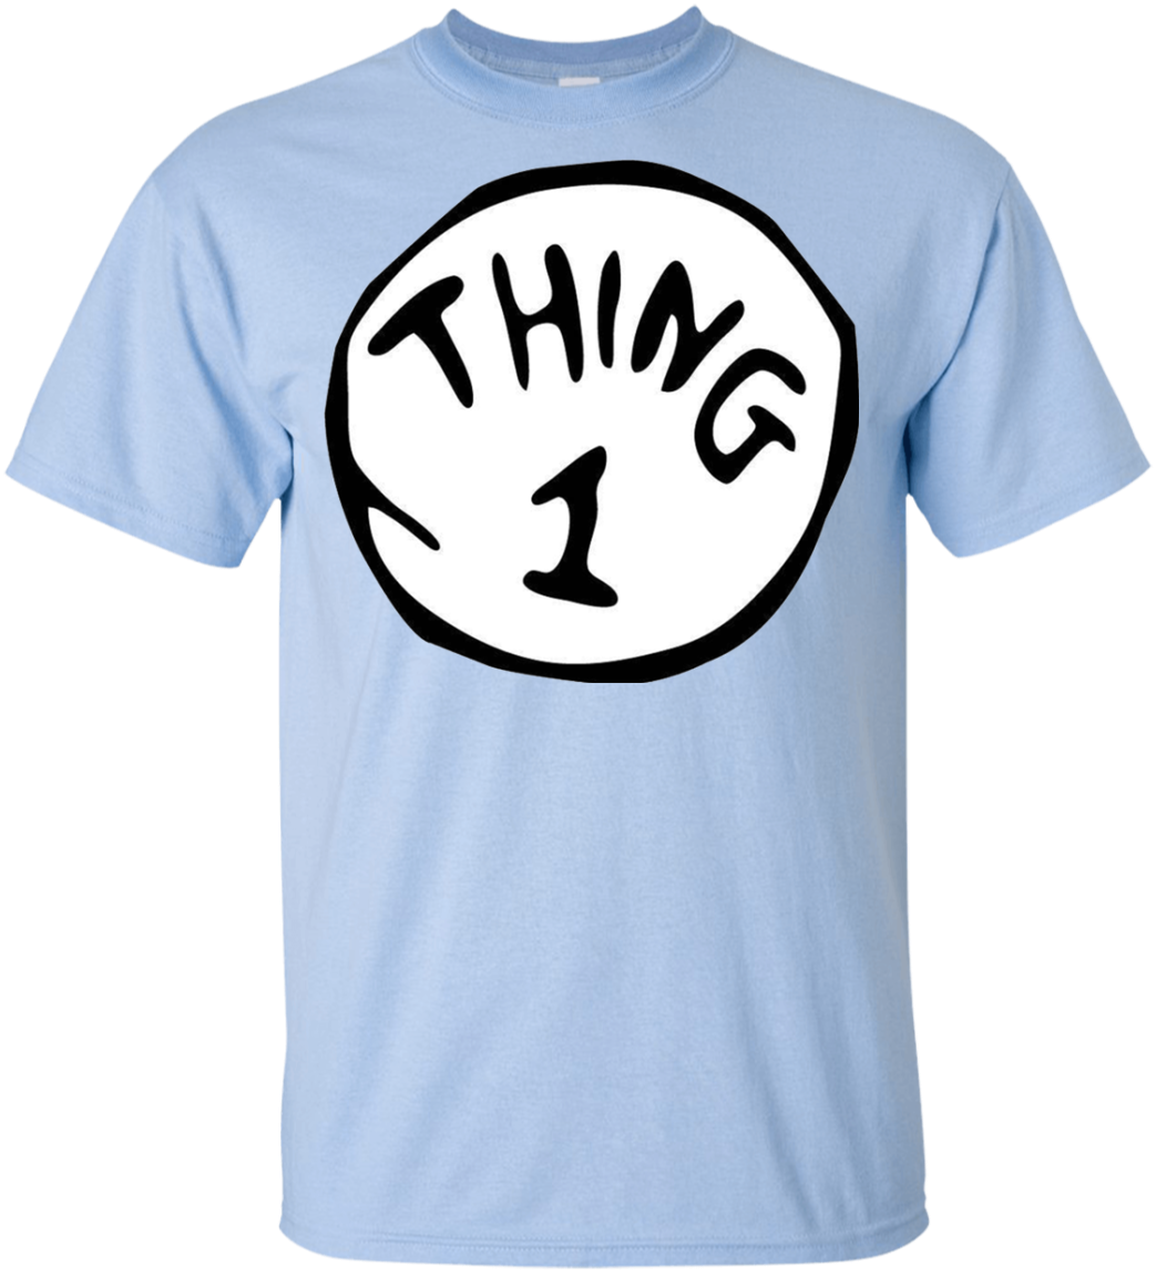 Thing1 Blue T Shirt Graphic PNG